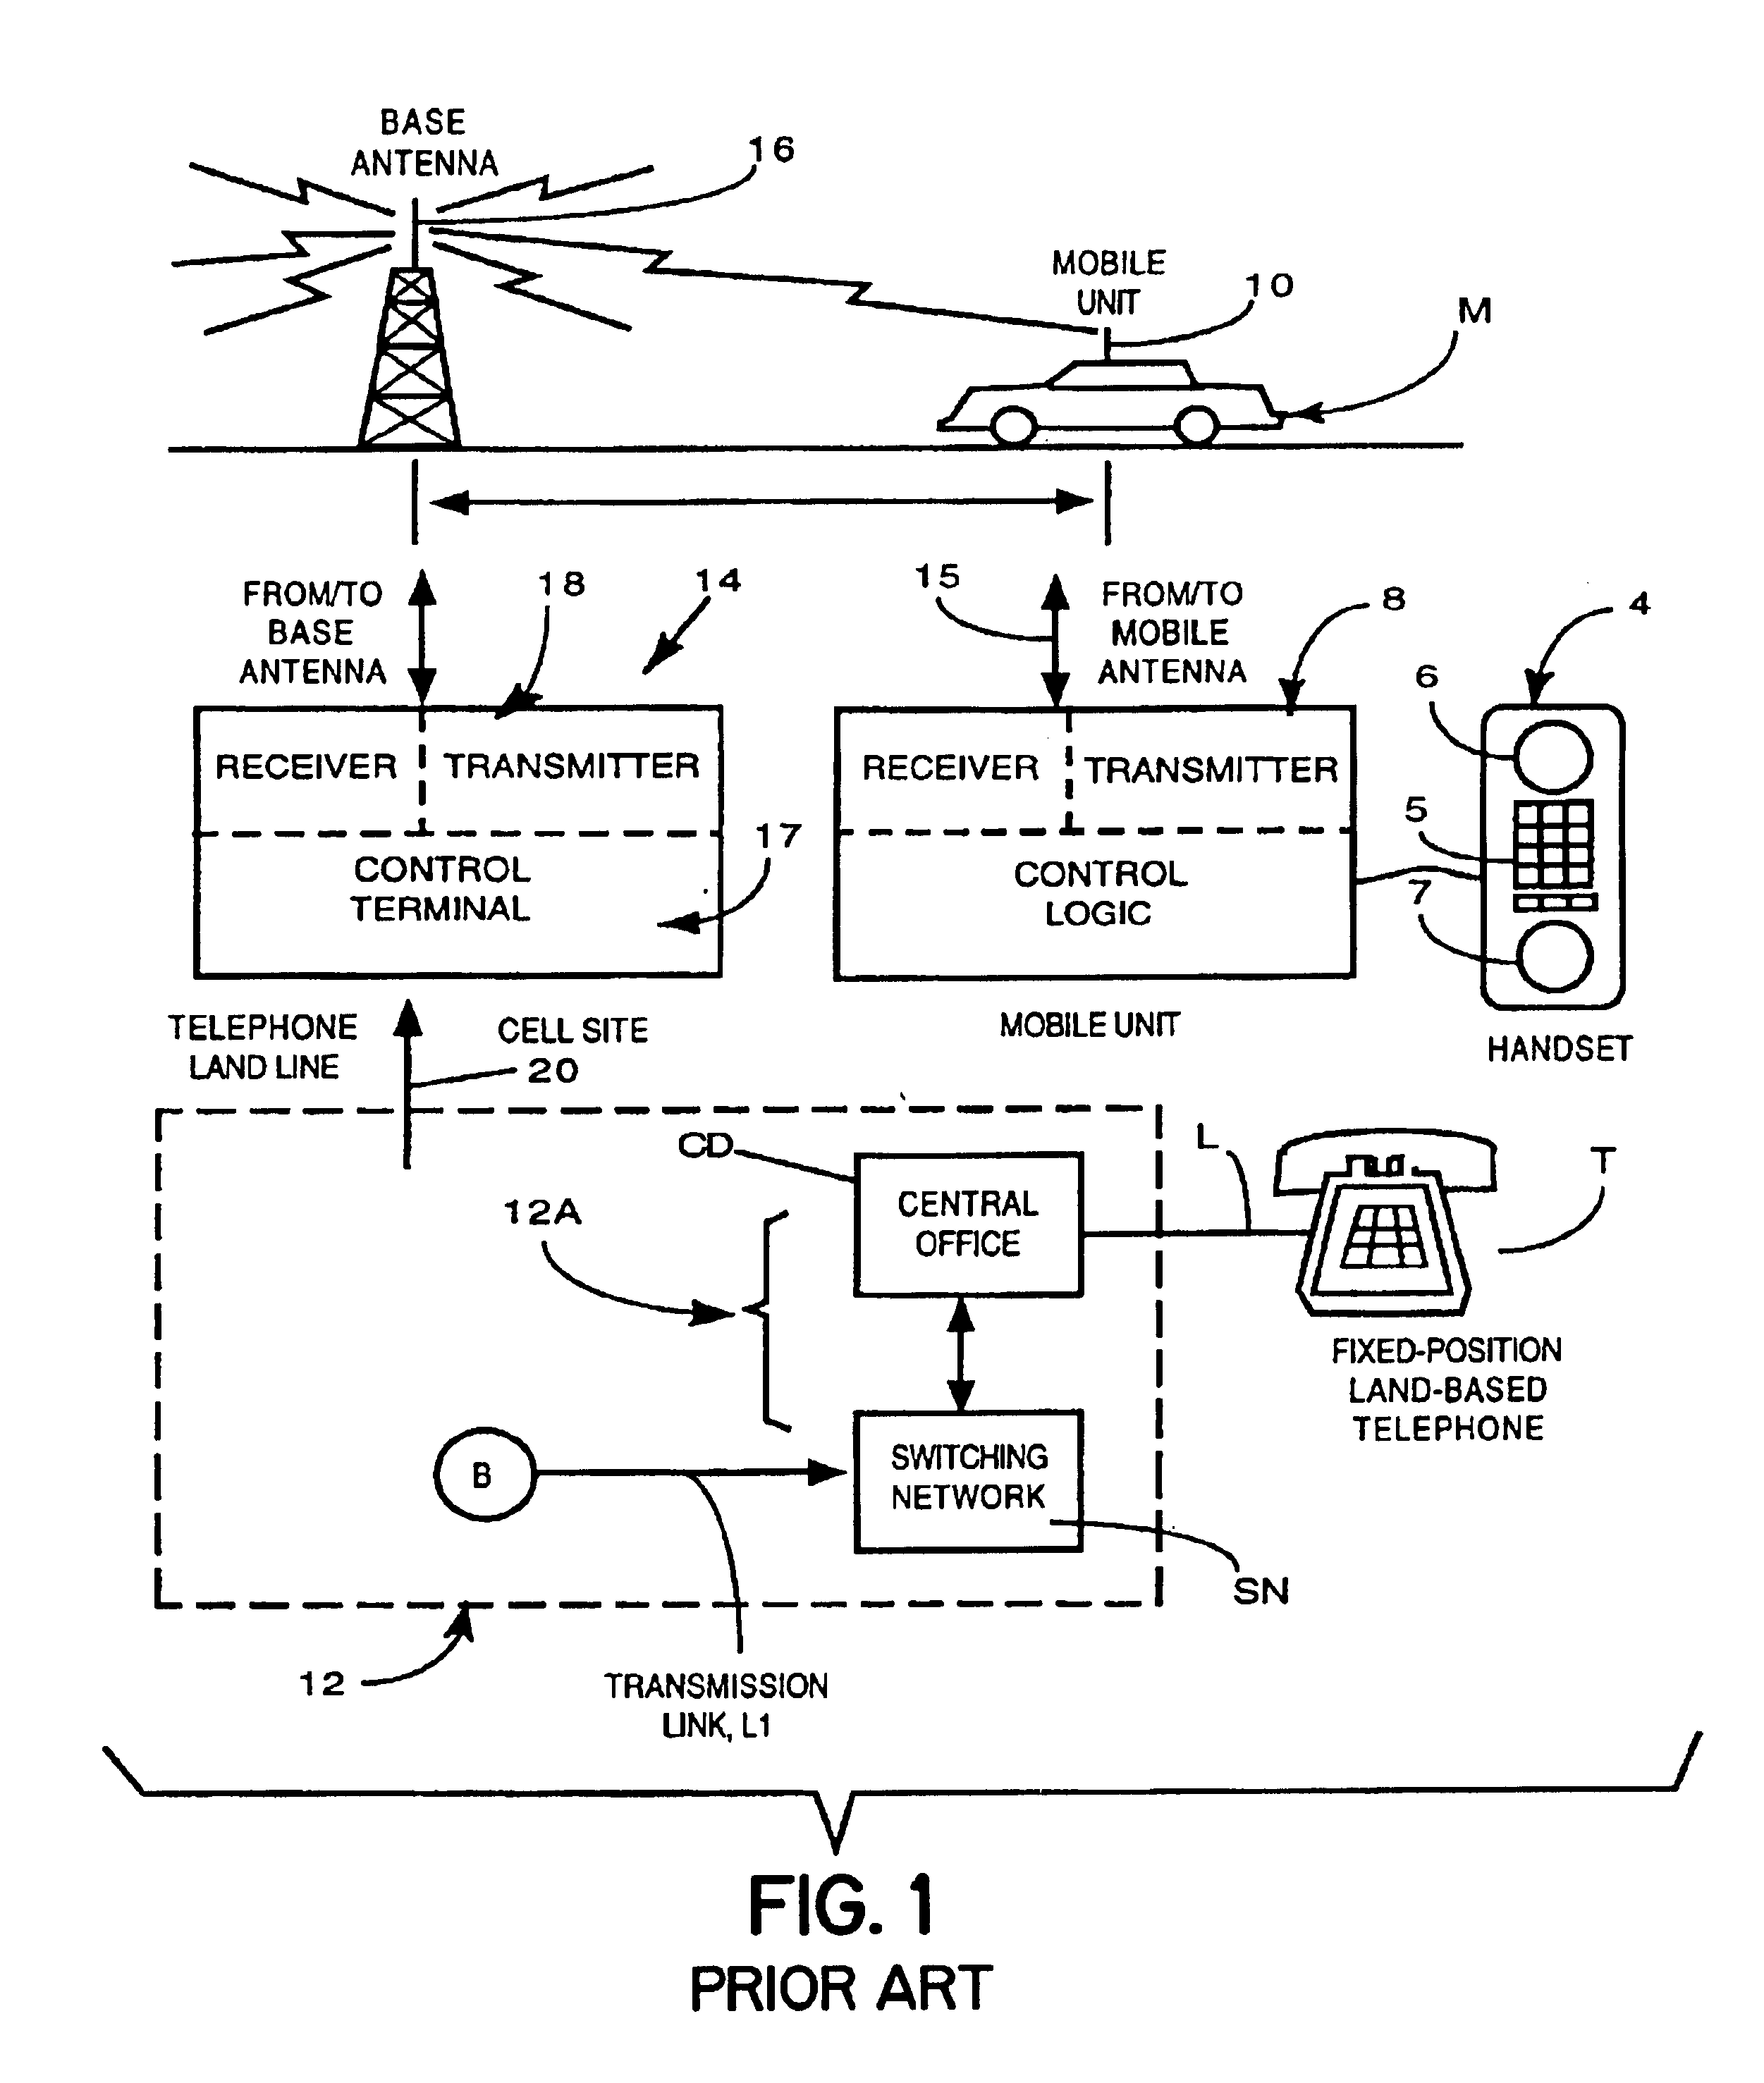 Cellular telephone system that uses position of a mobile unit to make call management decisions